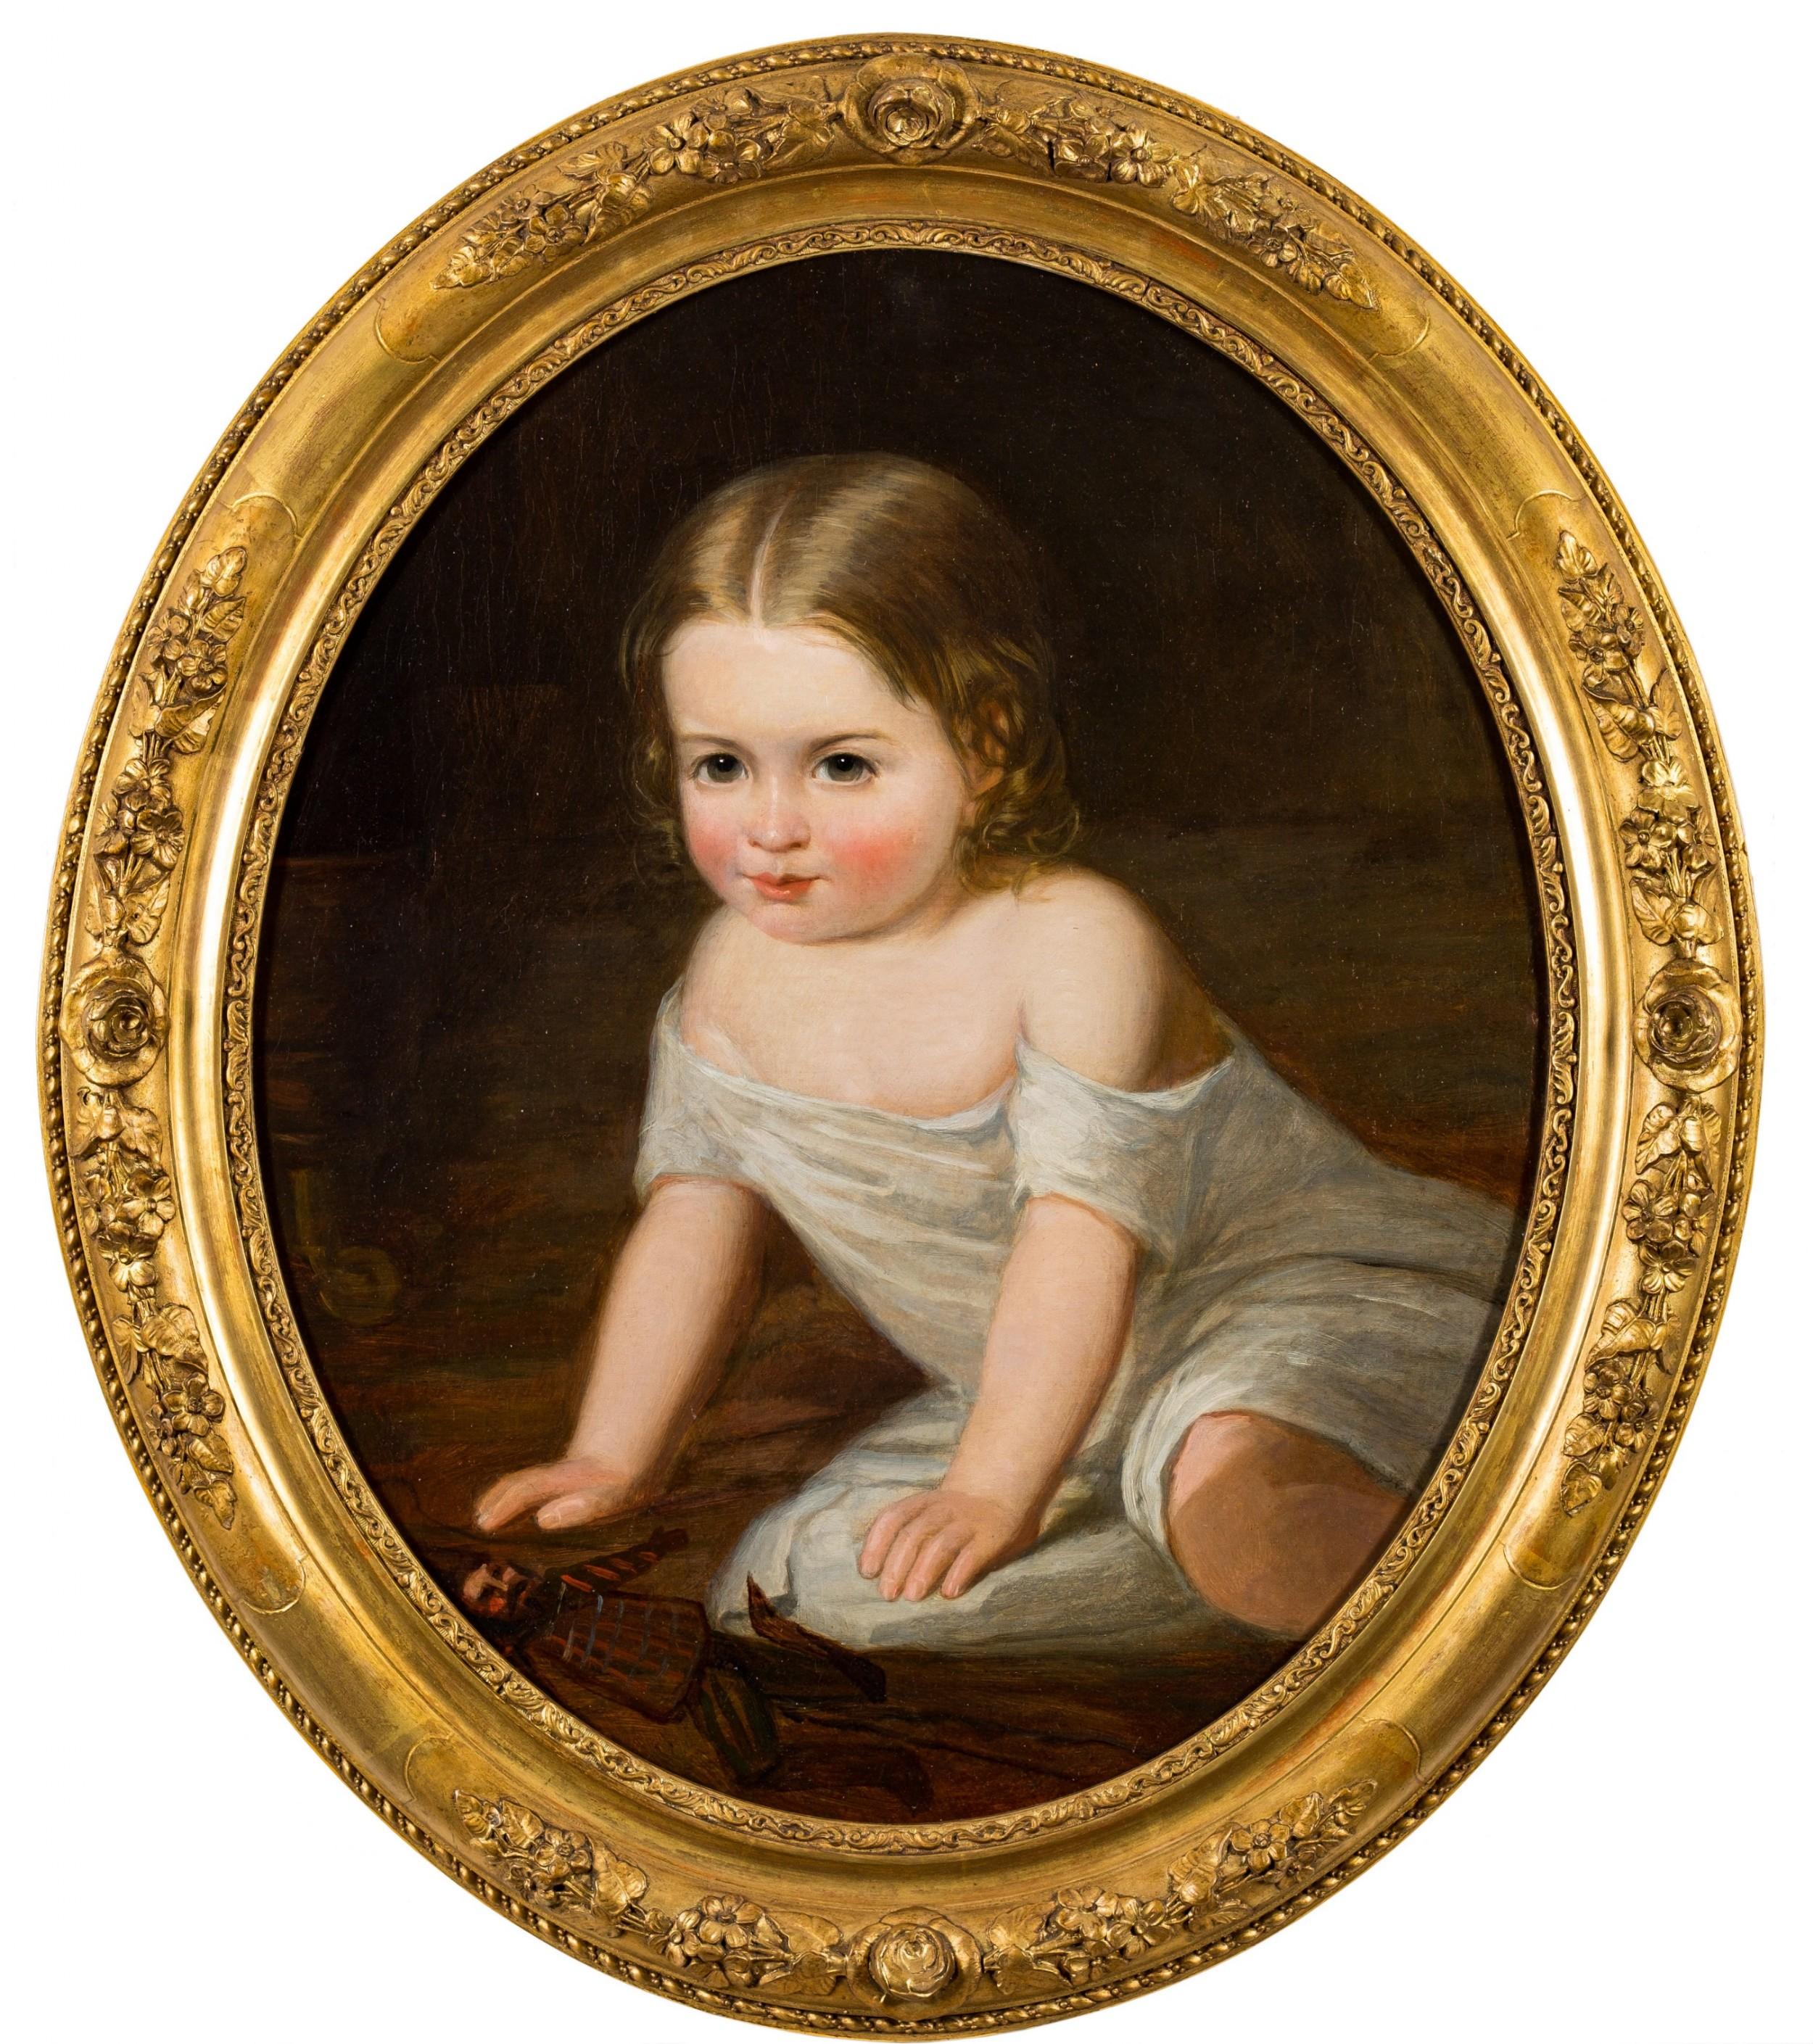 19th Century Portrait, Child At Play , Attributed To Henry Tanworth Wells